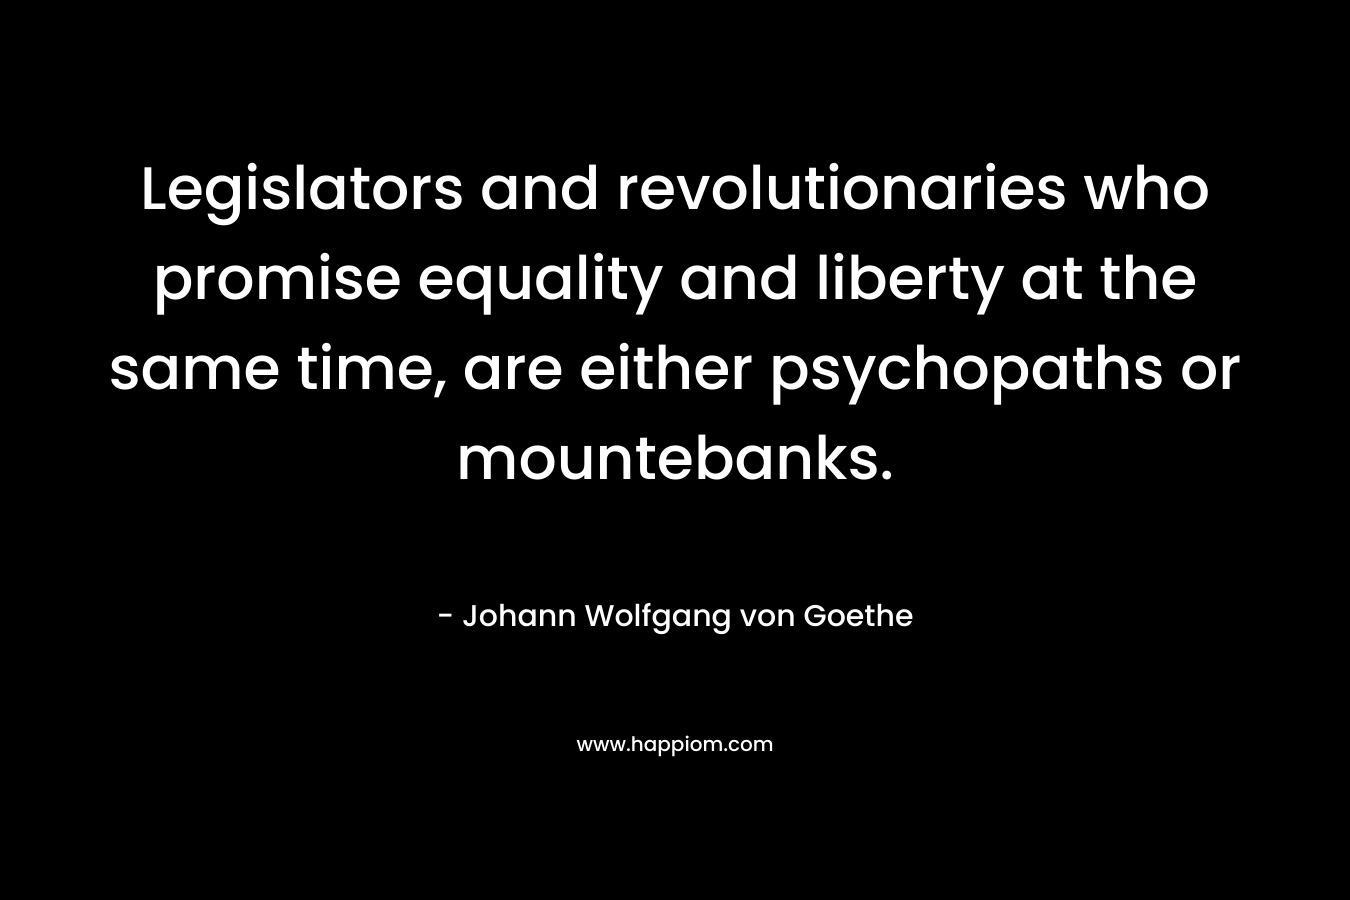 Legislators and revolutionaries who promise equality and liberty at the same time, are either psychopaths or mountebanks. – Johann Wolfgang von Goethe